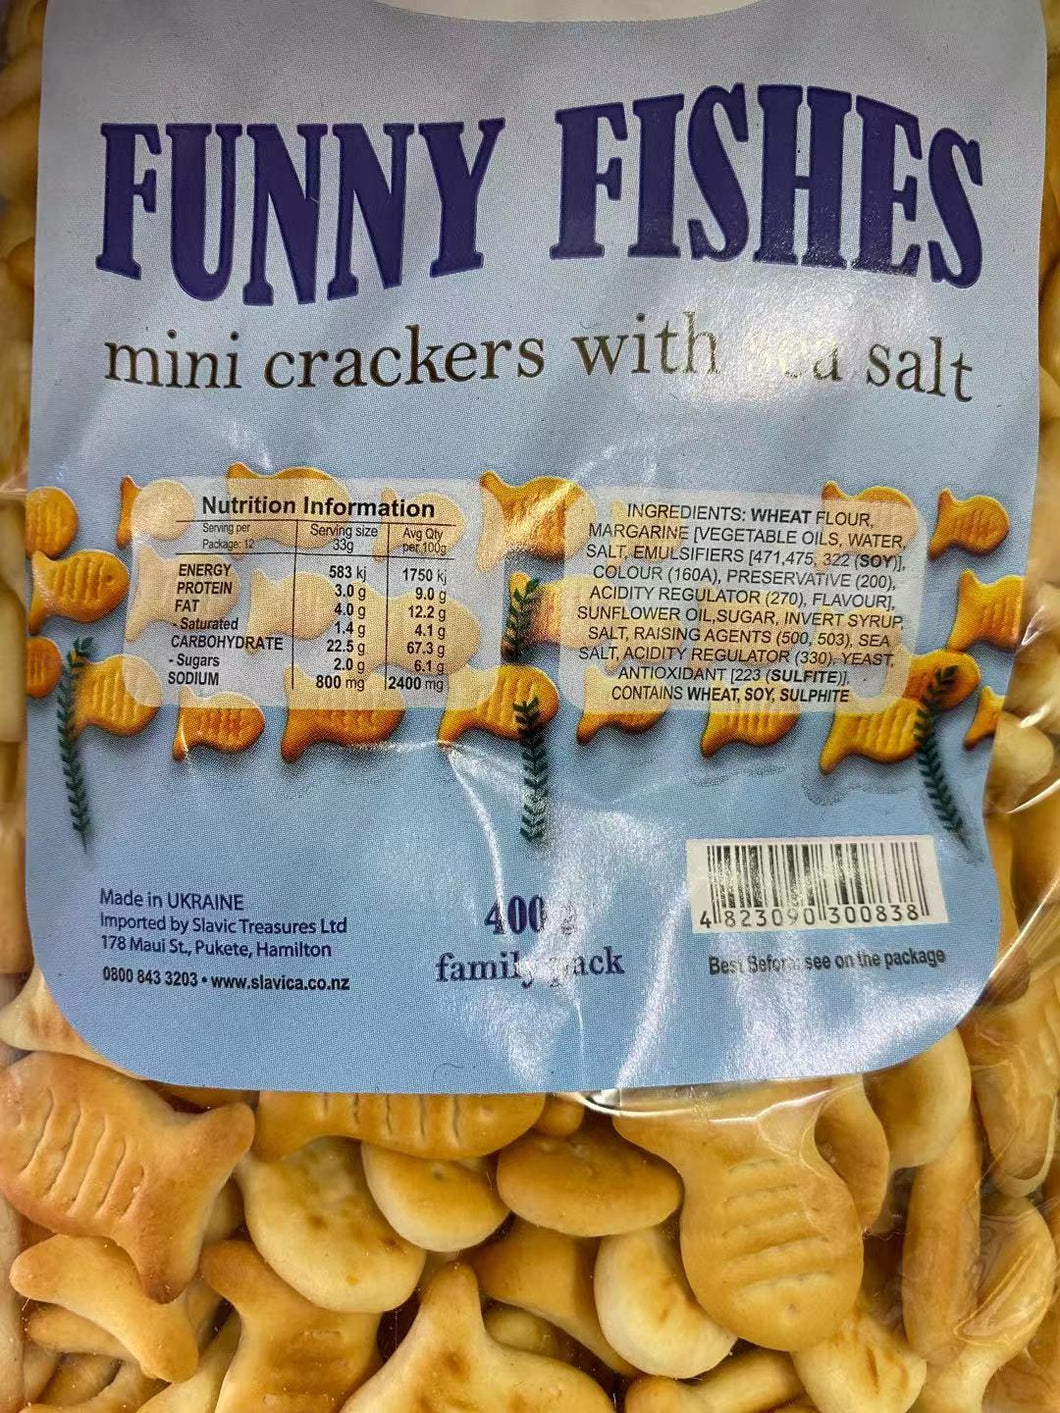 Funny Fishes mini crackers with sea salt